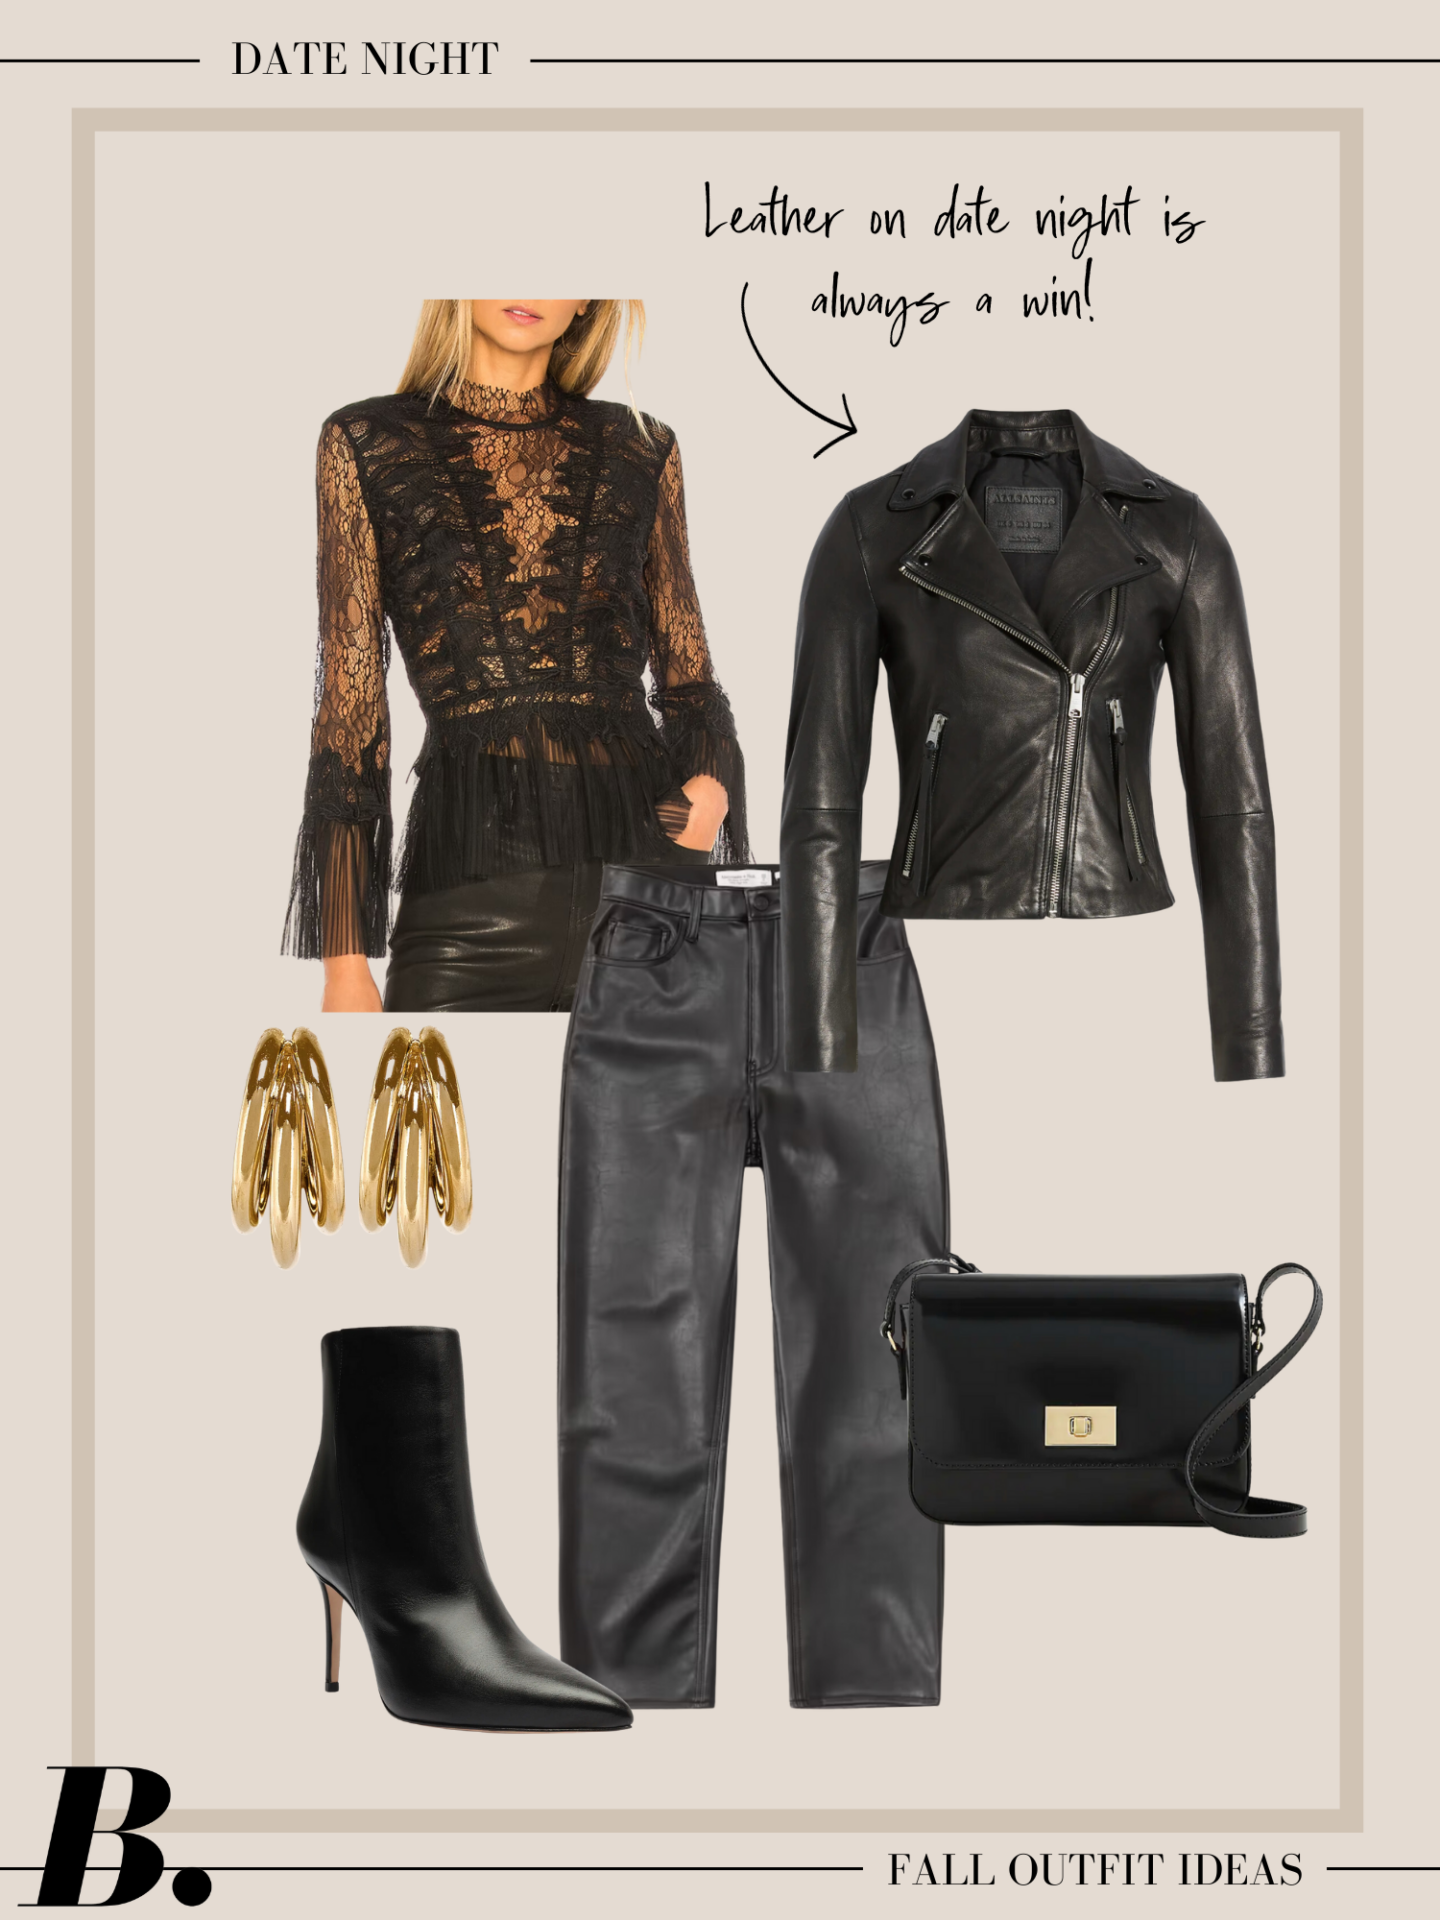 Fall Date Night outfit ideas